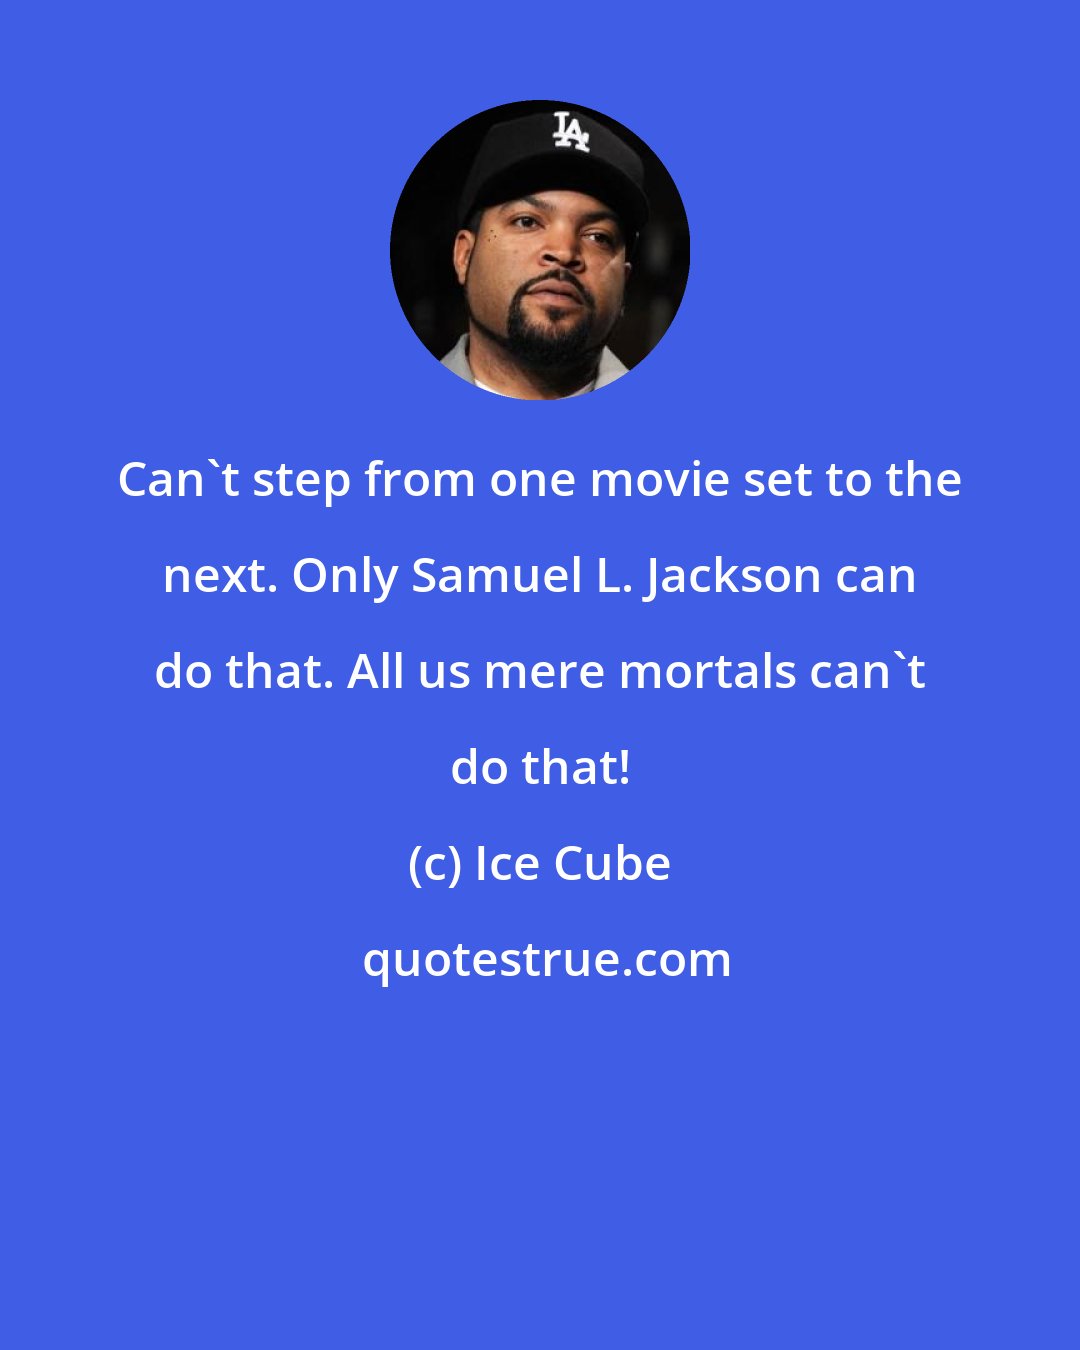 Ice Cube: Can't step from one movie set to the next. Only Samuel L. Jackson can do that. All us mere mortals can't do that!